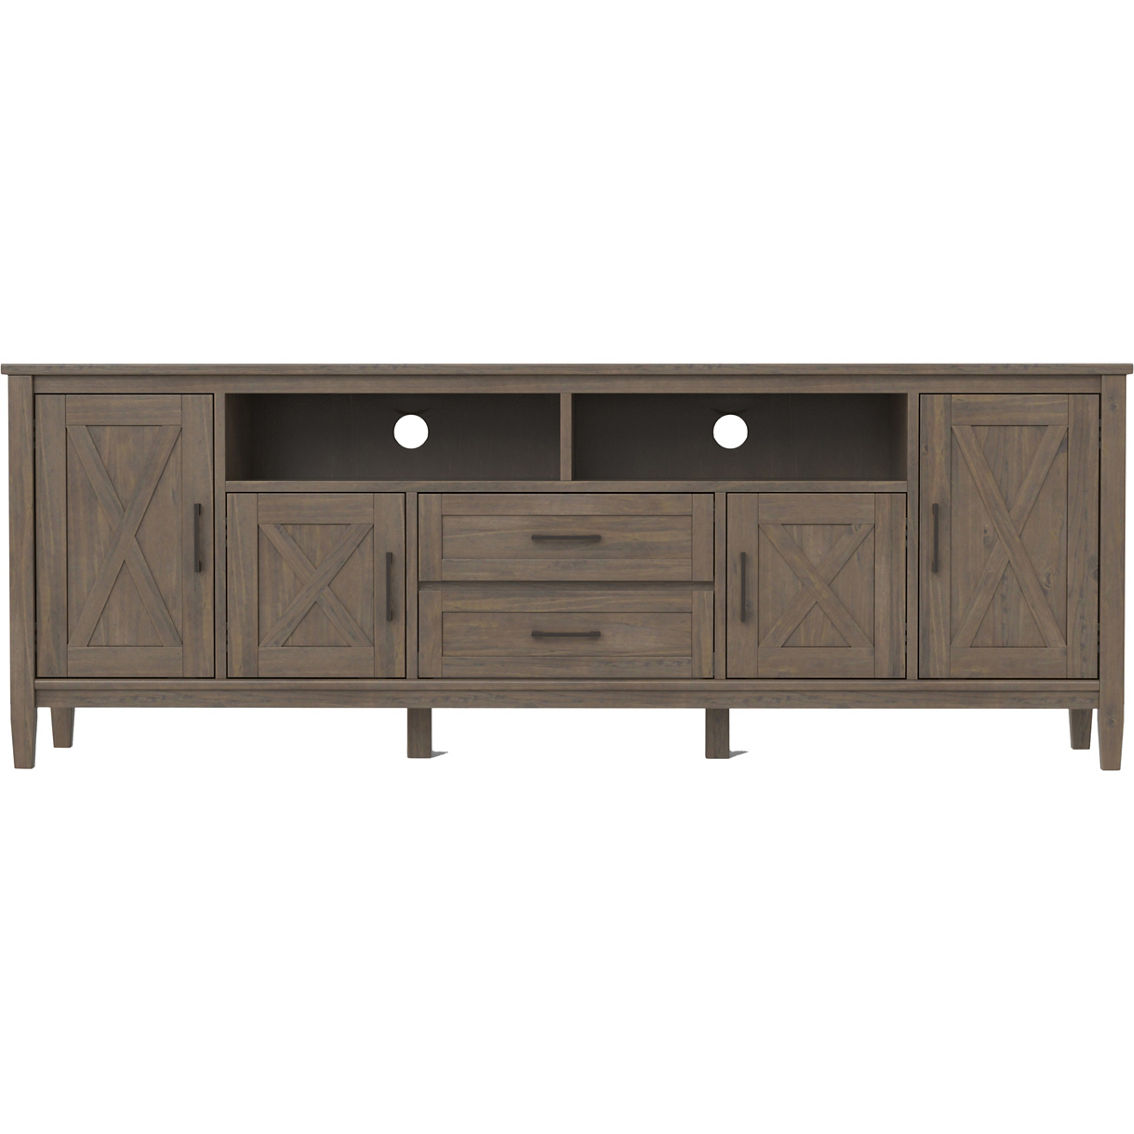 Simpli Home Ela Solid Wood 72 in. TV Media Stand for TVs up to 80 in. - Image 2 of 5